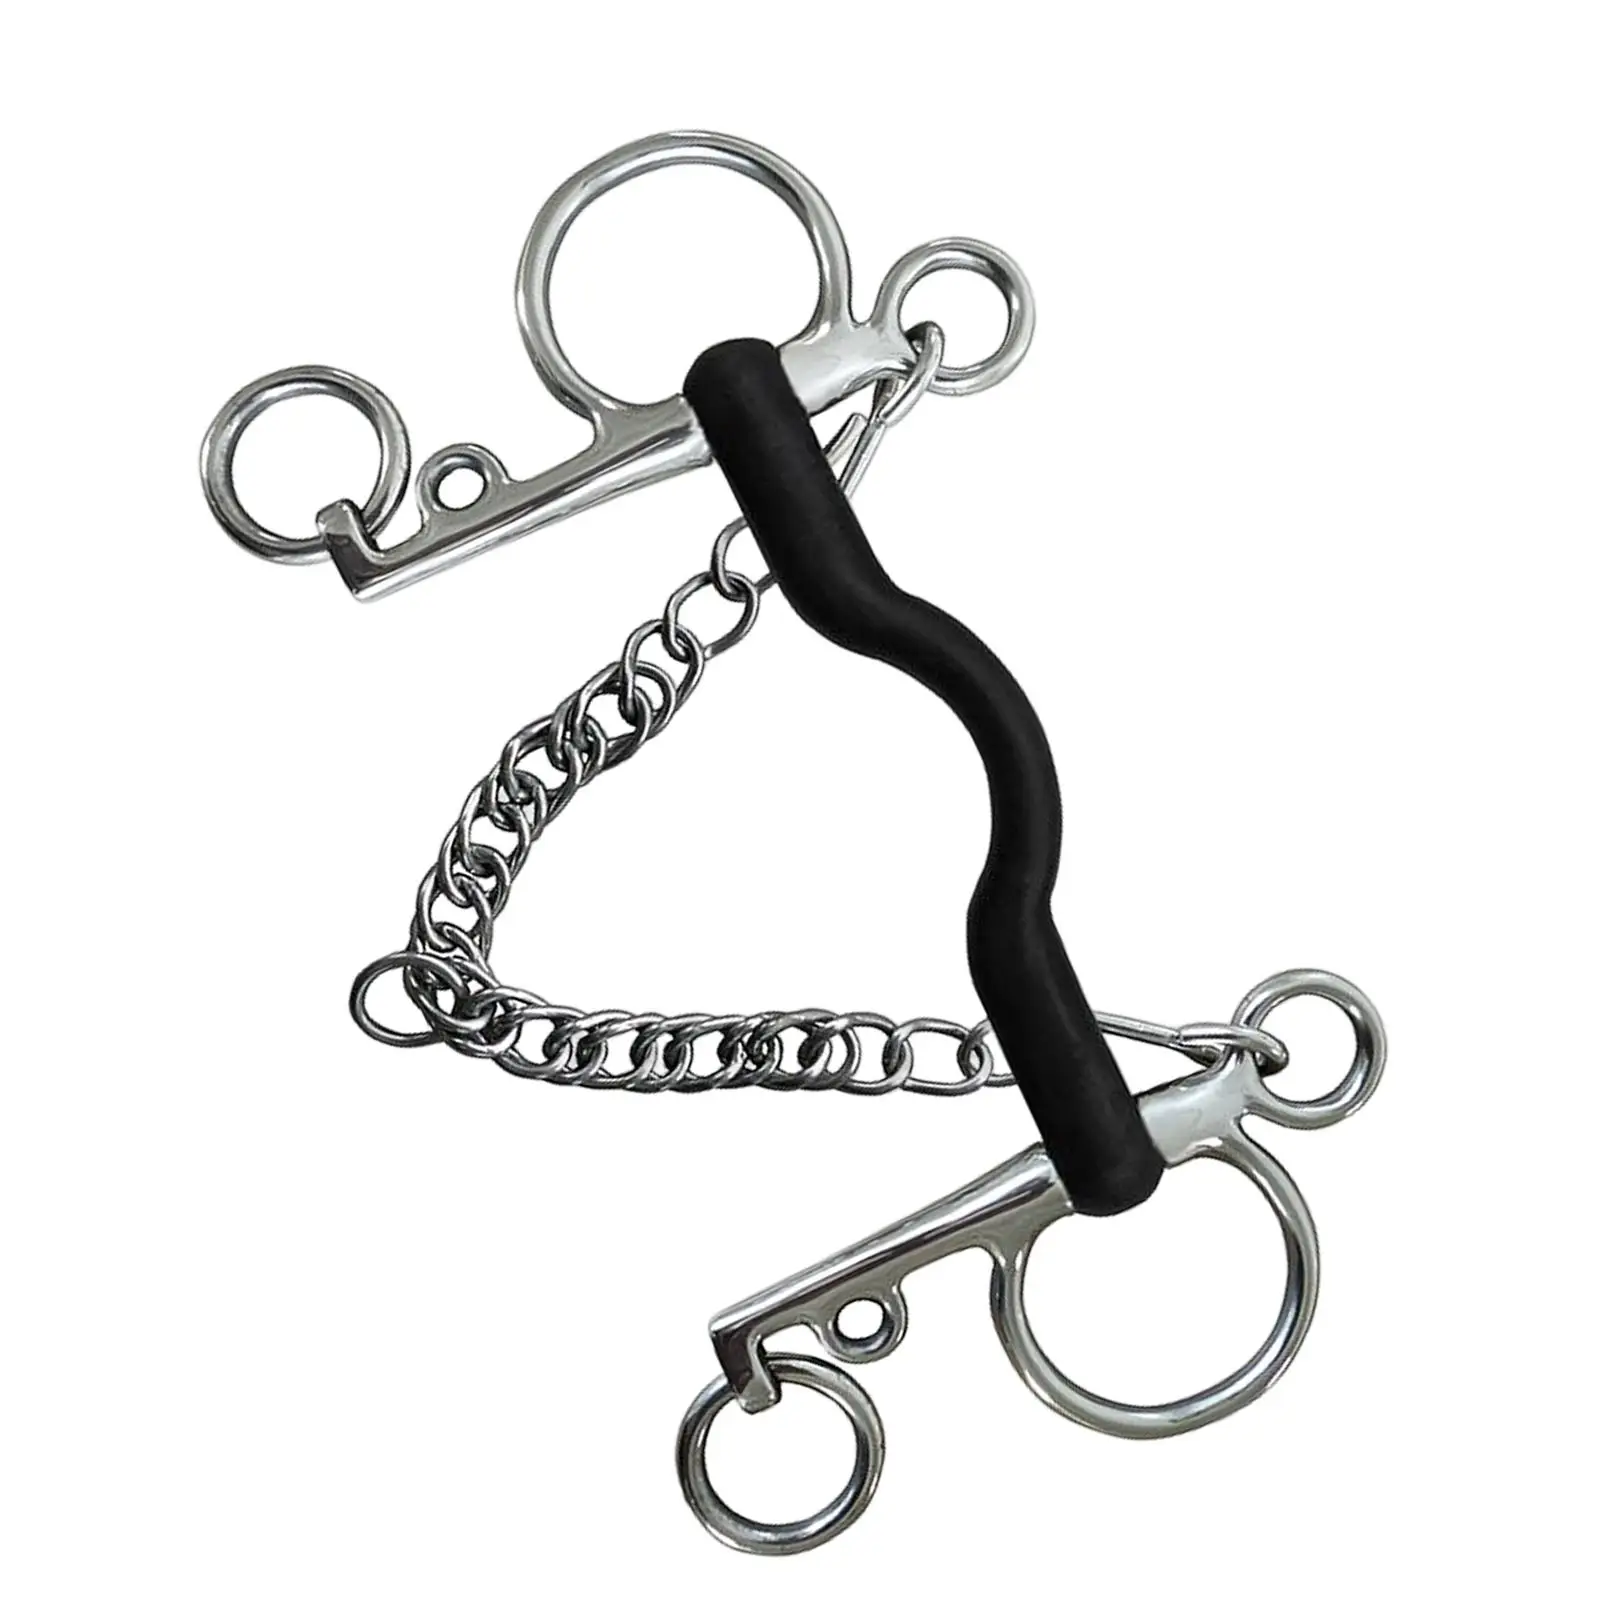 Western Style Horse Bit, Stainless Steel, with Curb Hooks Chain for Training